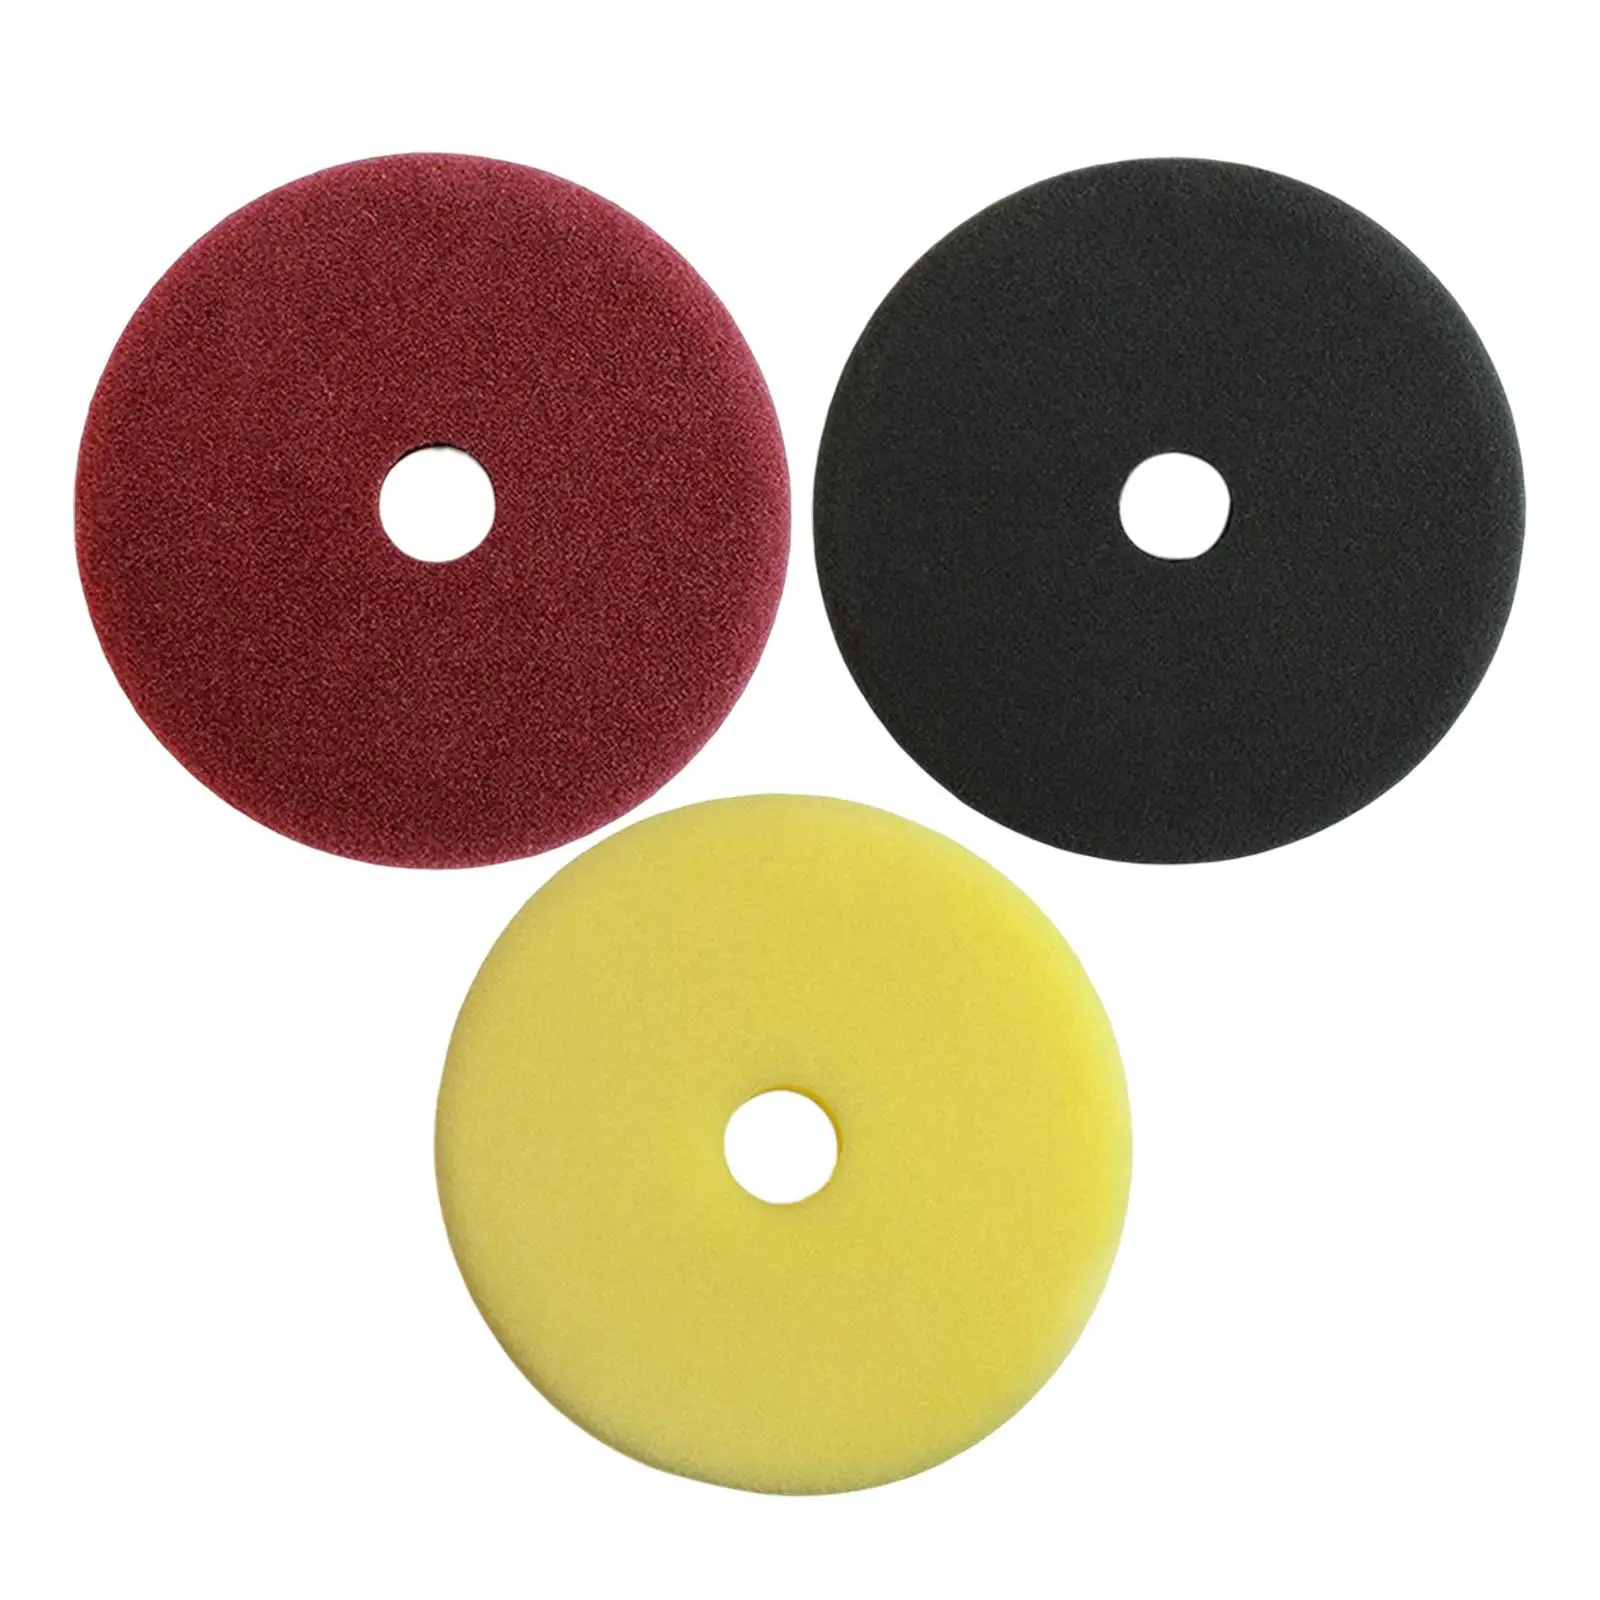 3Pcs 7 Inches car Polishing Pads Compound Buffing Sponge Pads Buffing Waxing for Car Buffer Polisher Cleaning Waxing